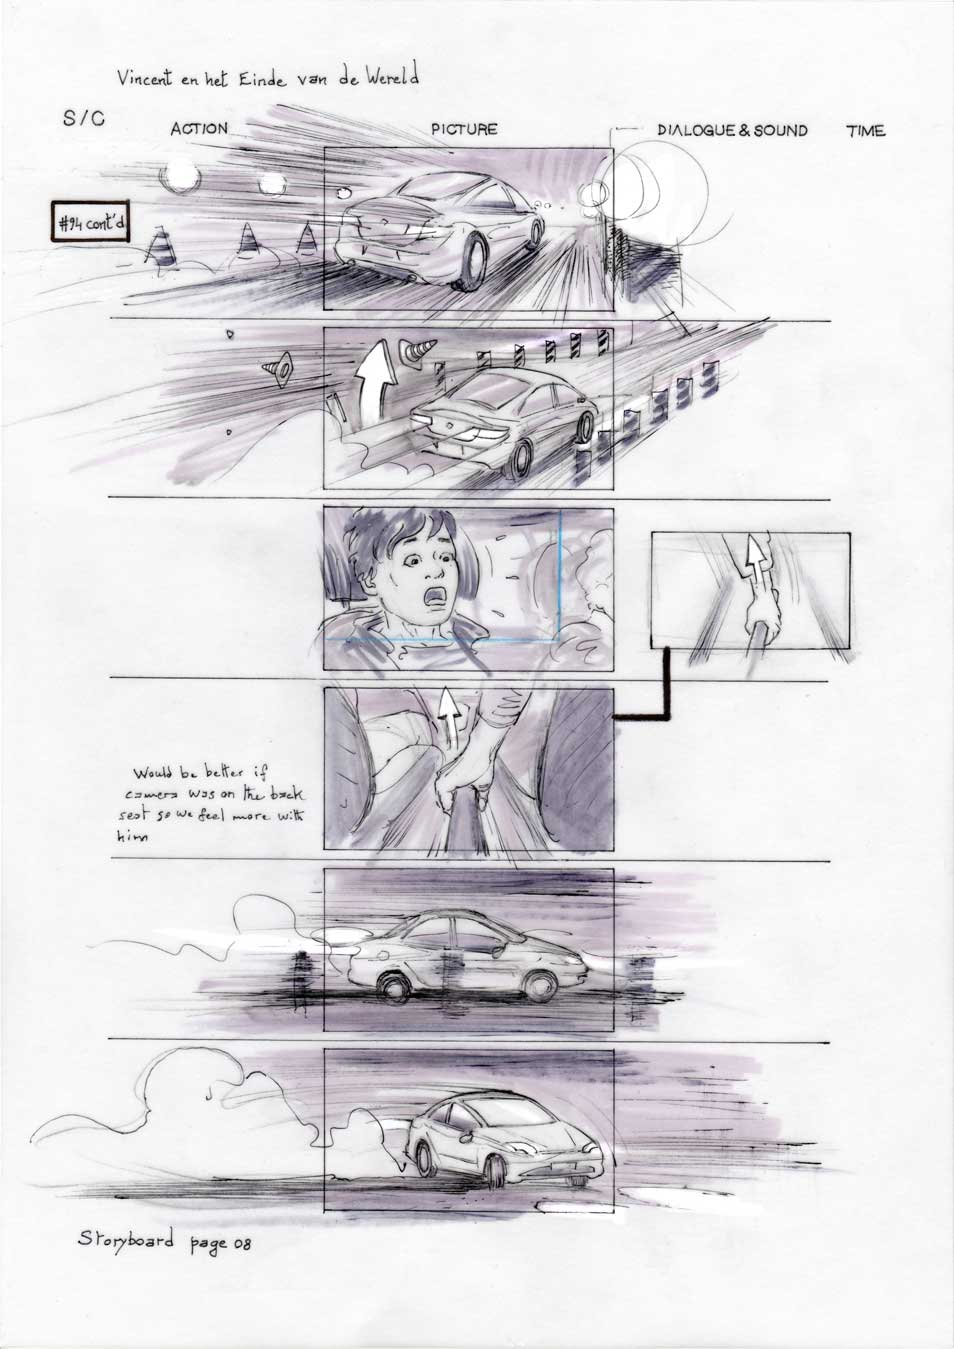 Vincent and the End of the World storyboard 08